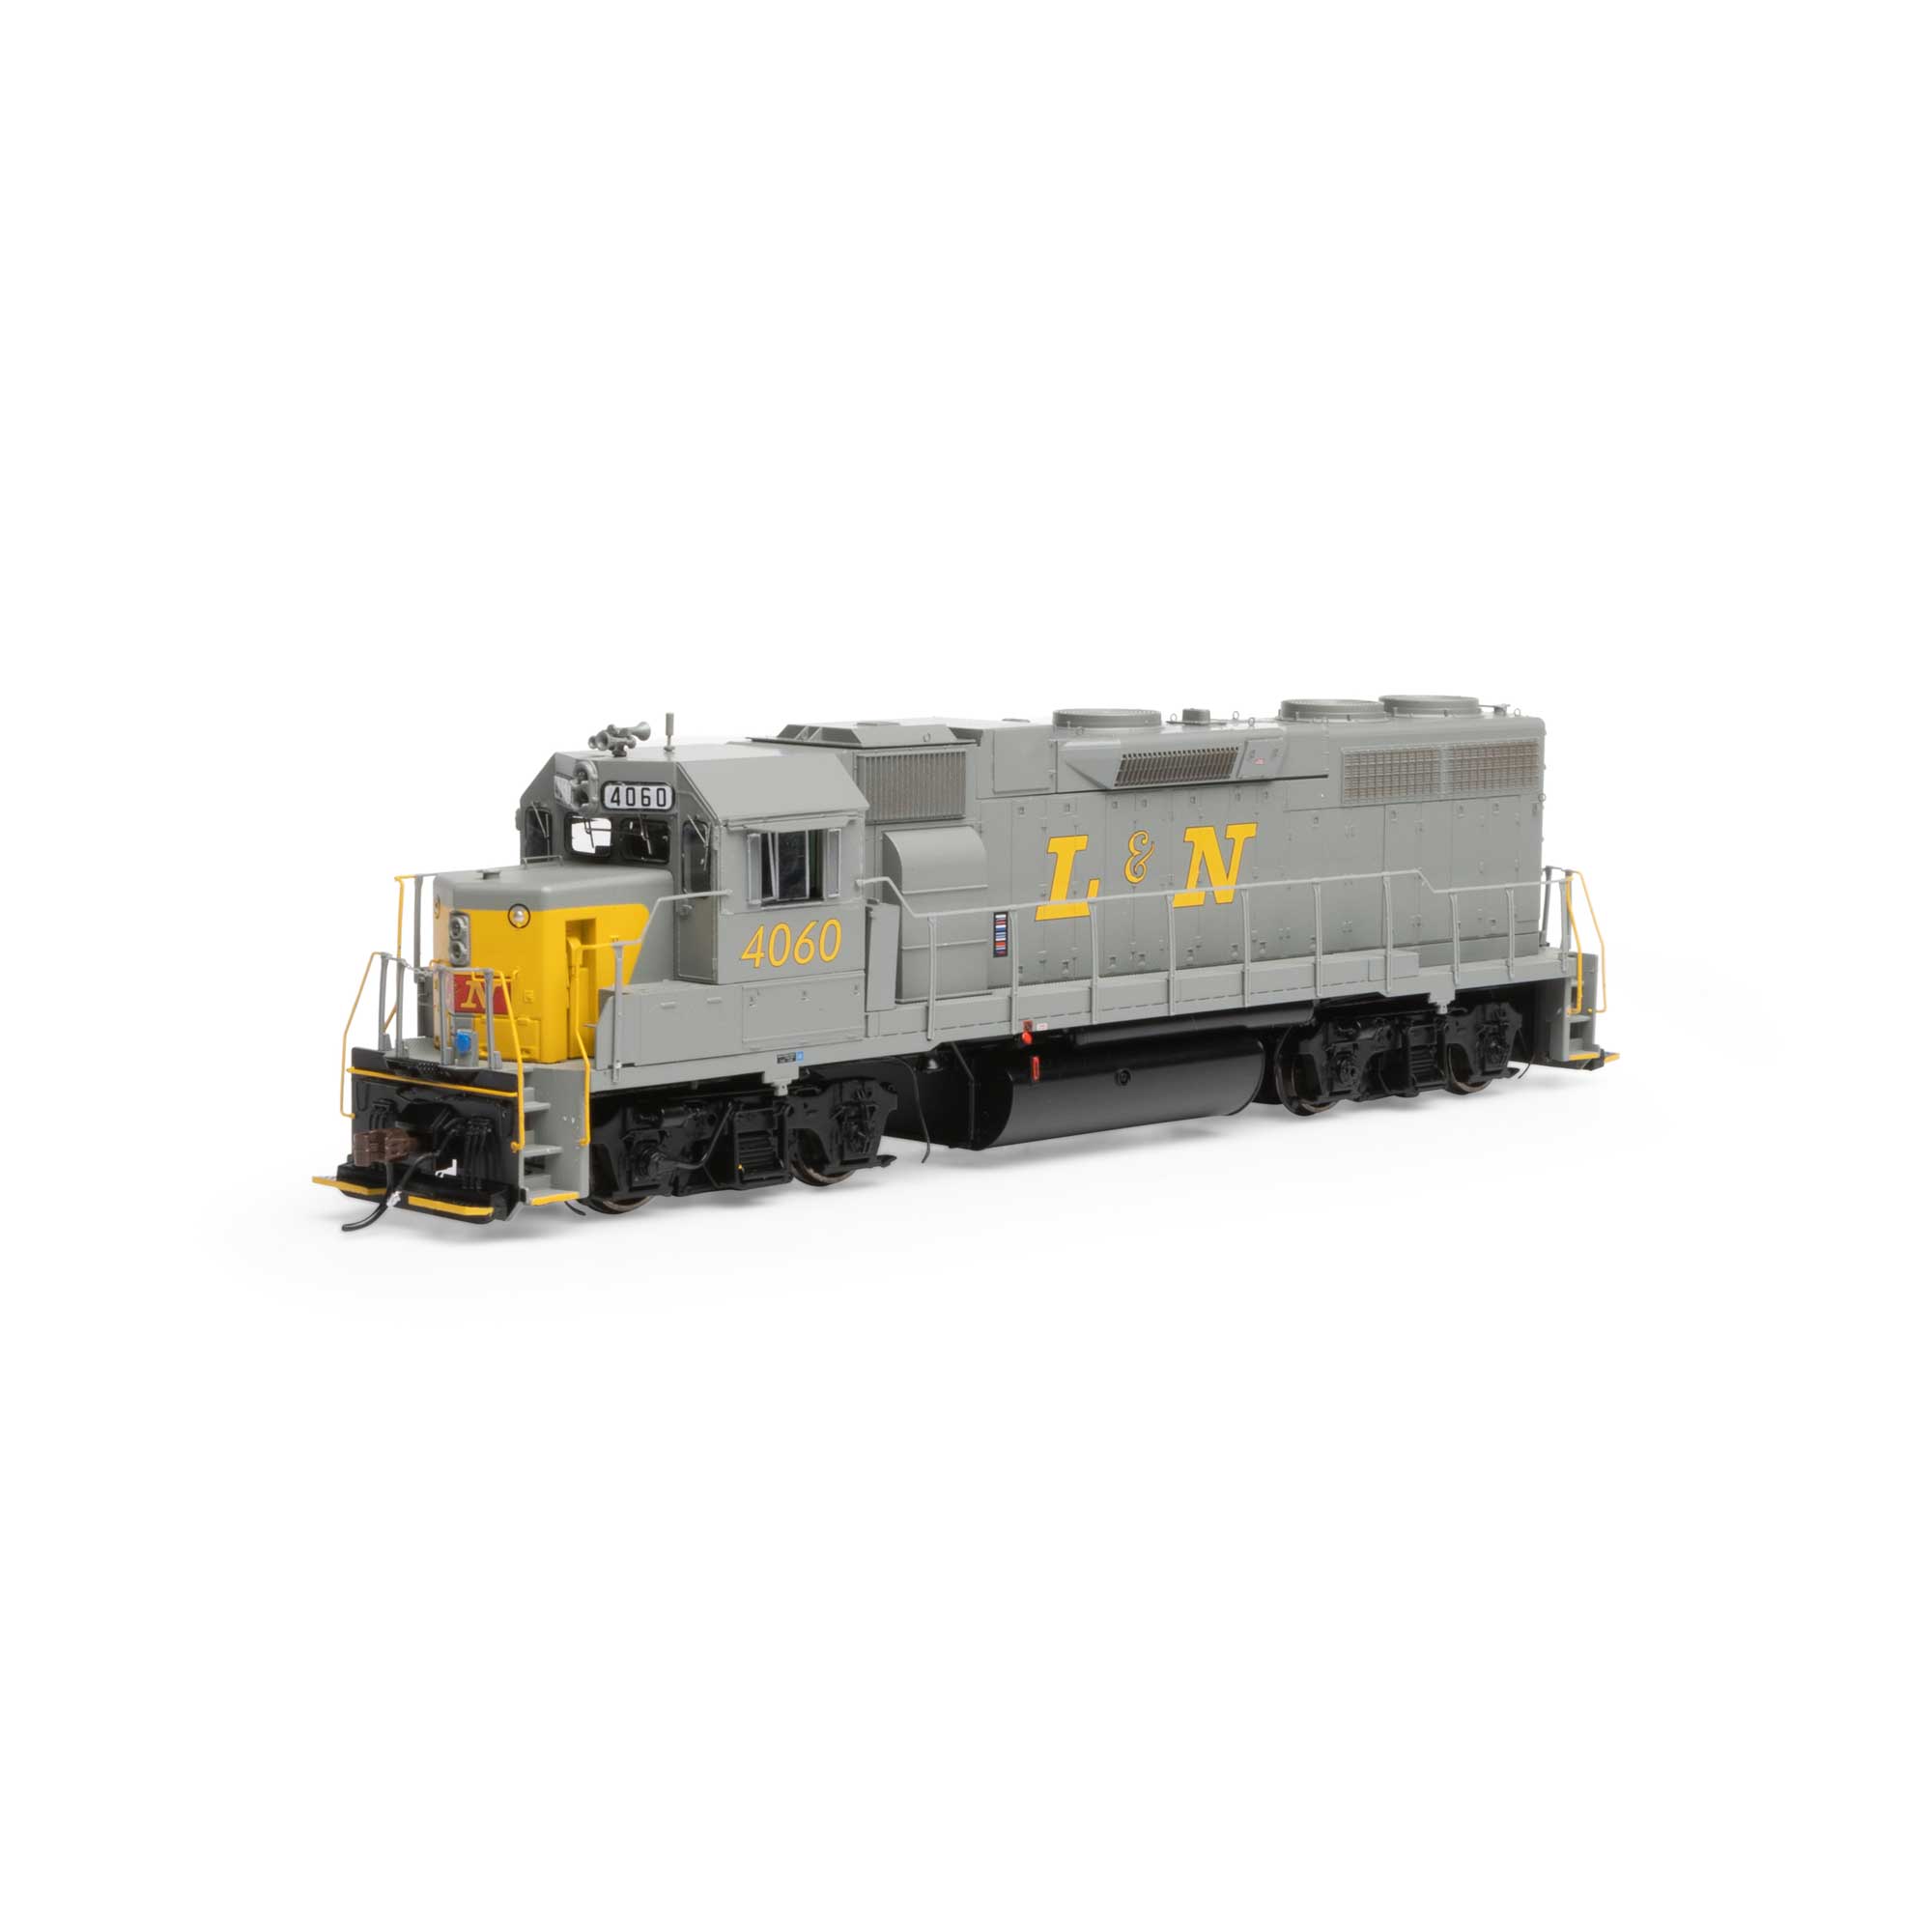 Athearn HO GP38-2 with DCC & Sound, L&N #4060 | Horizon Hobby